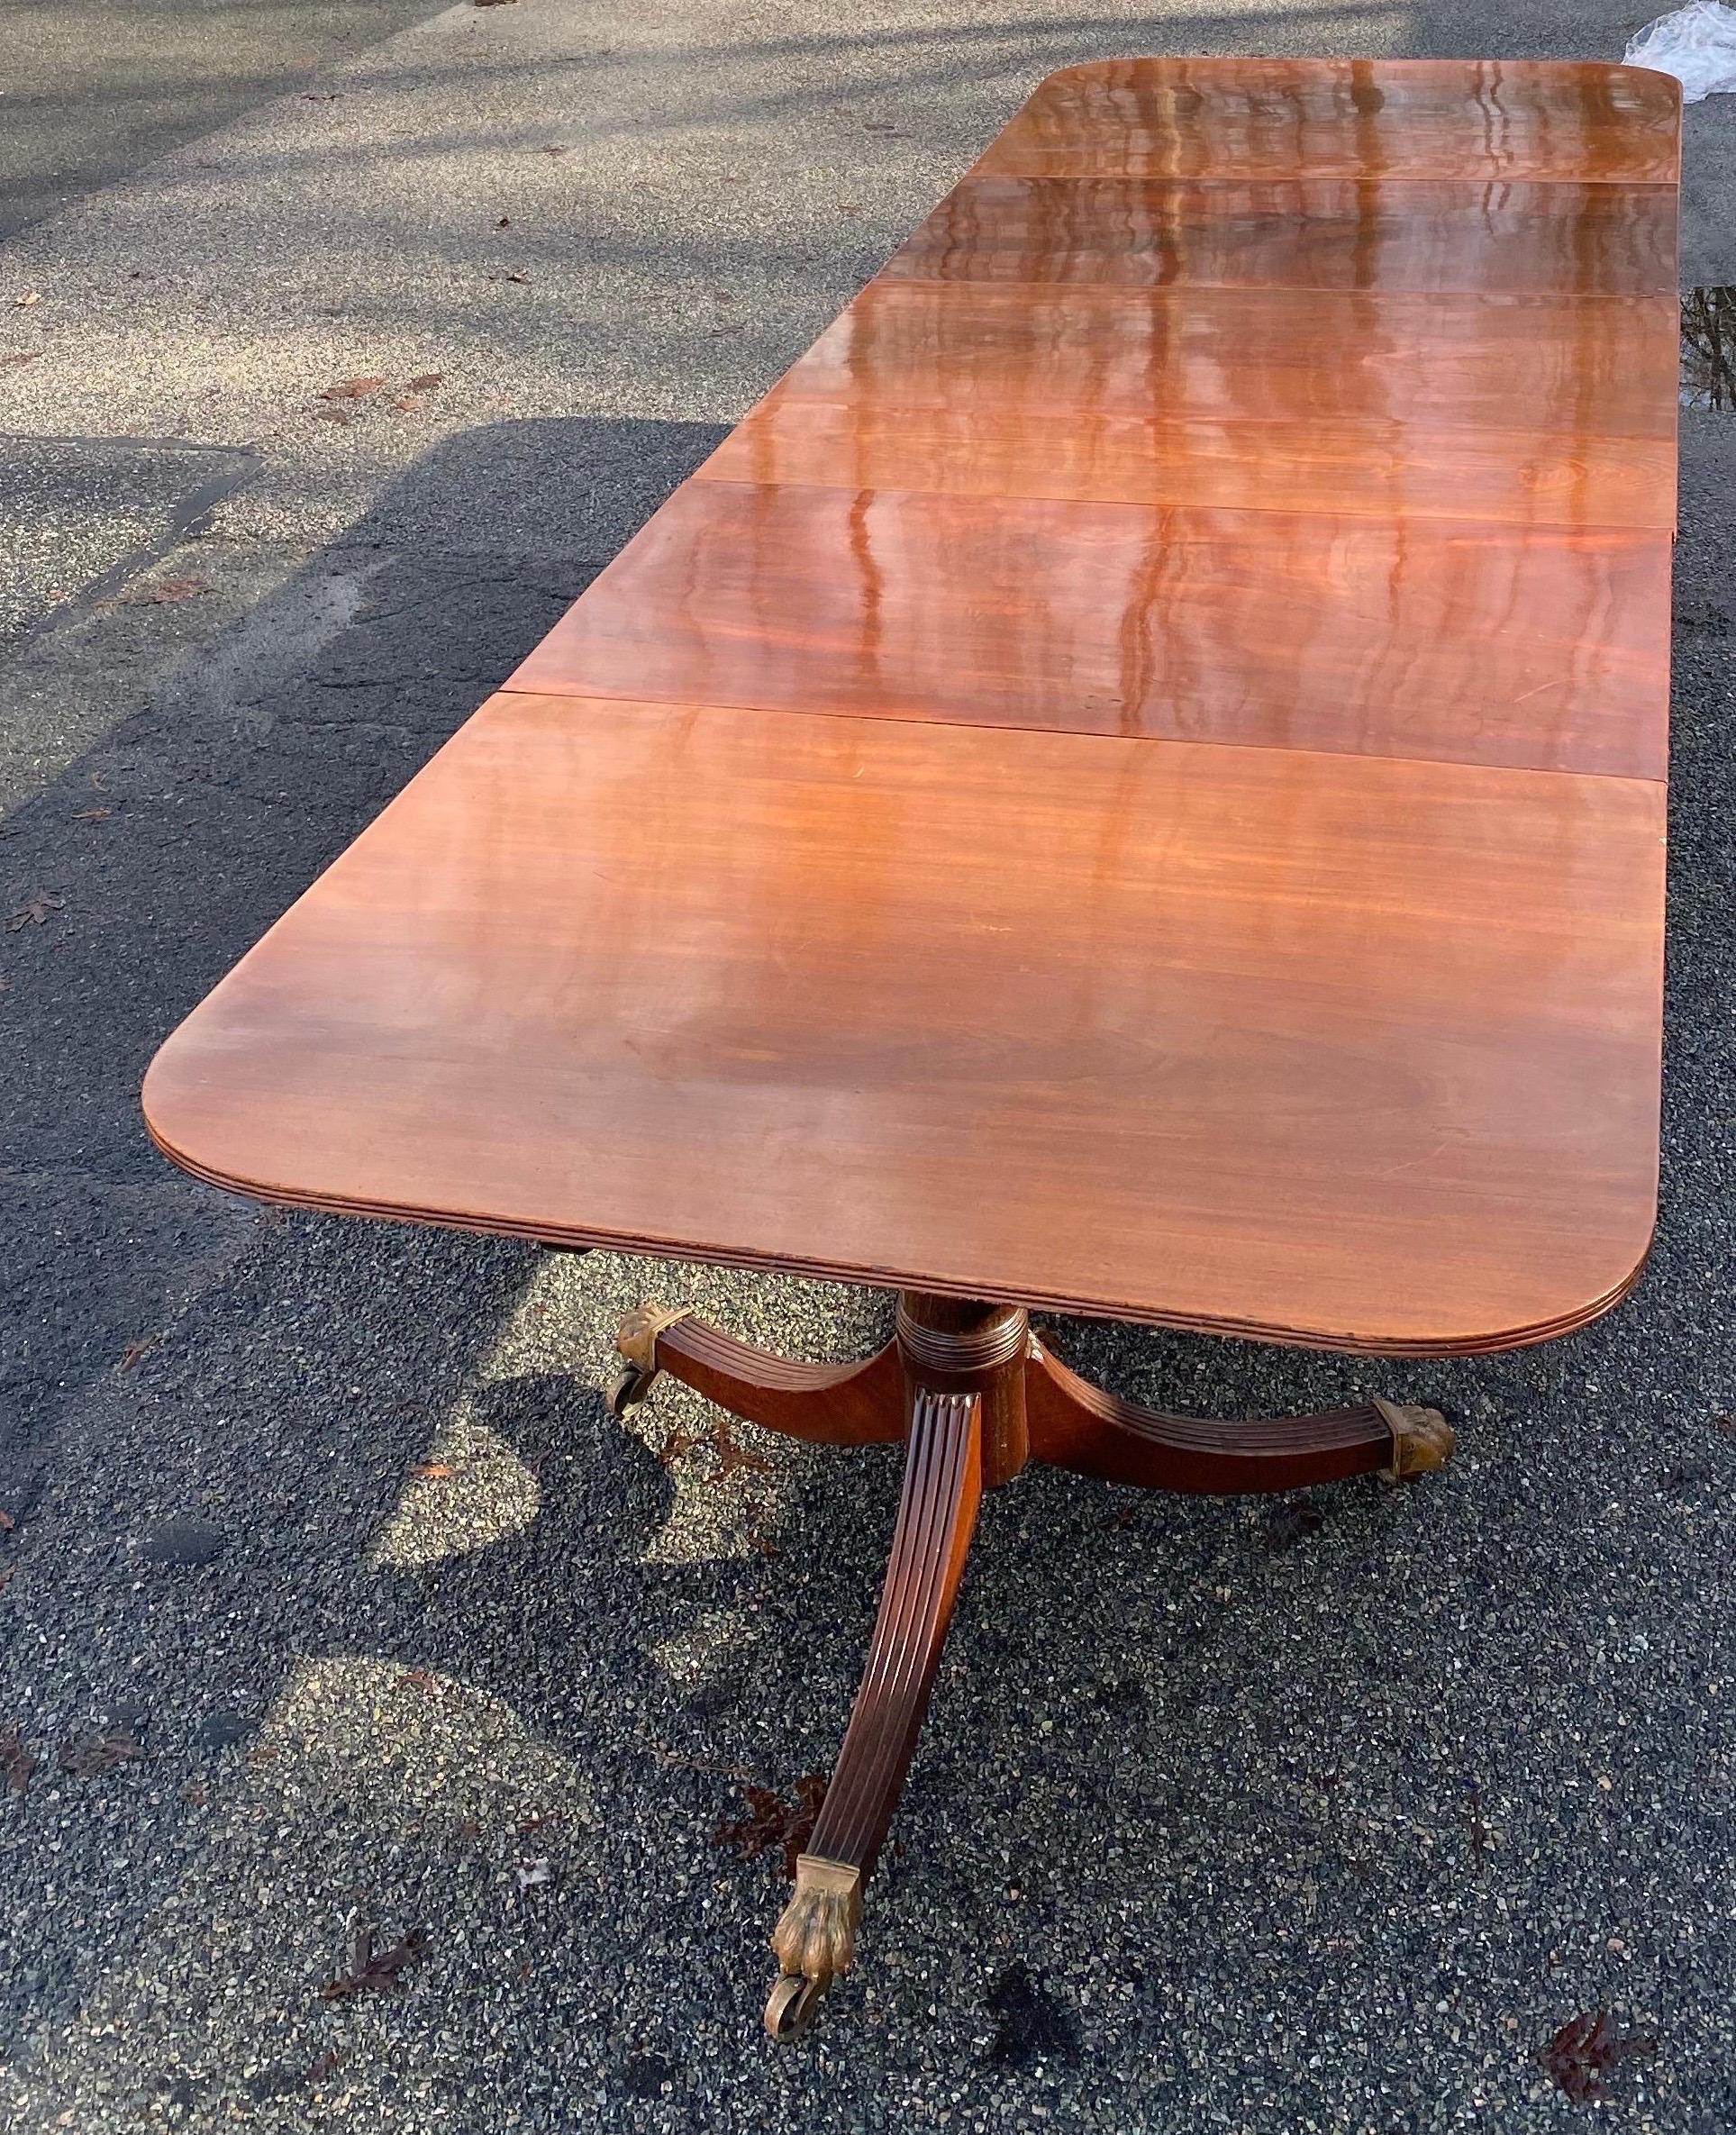 Great quality 19th century English mahogany triple pedestal dining table with harry paw castors. Table consists of three bases, three tops, two leaves extending to 154.5